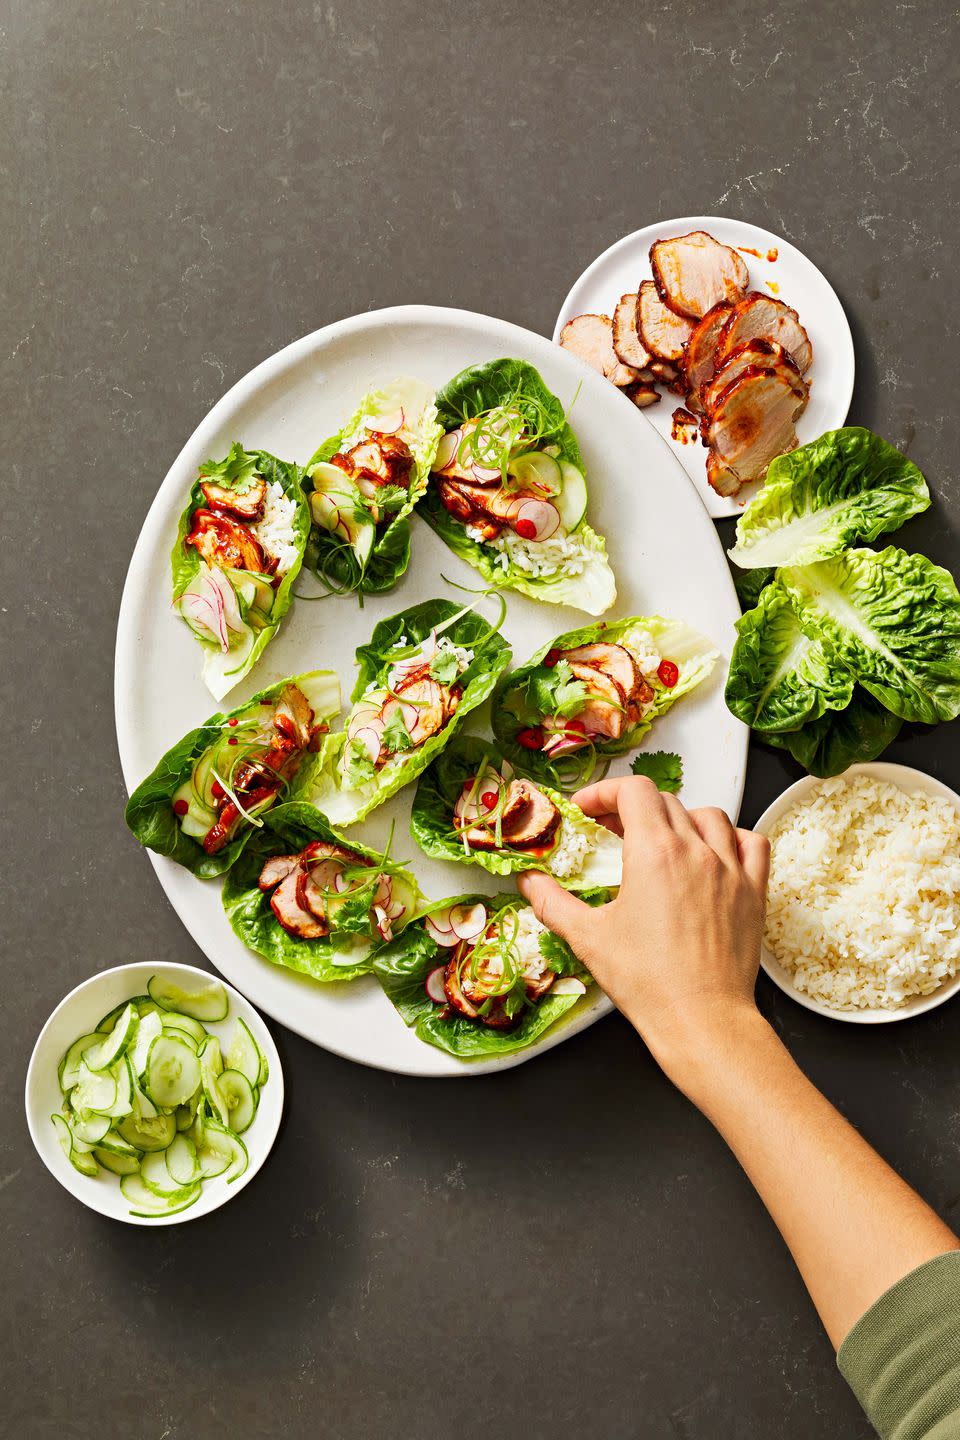 <p>Gochujang adds impressive heat to juicy pork tenderloin. Cool it down with crisp lettuce and cooked rice.</p><p>Get the <strong><a href="https://www.goodhousekeeping.com/food-recipes/a38538435/pork-lettuce-wraps-recipe/" rel="nofollow noopener" target="_blank" data-ylk="slk:Fiery Pork Lettuce Wraps recipe" class="link ">Fiery Pork Lettuce Wraps recipe</a></strong>. </p>